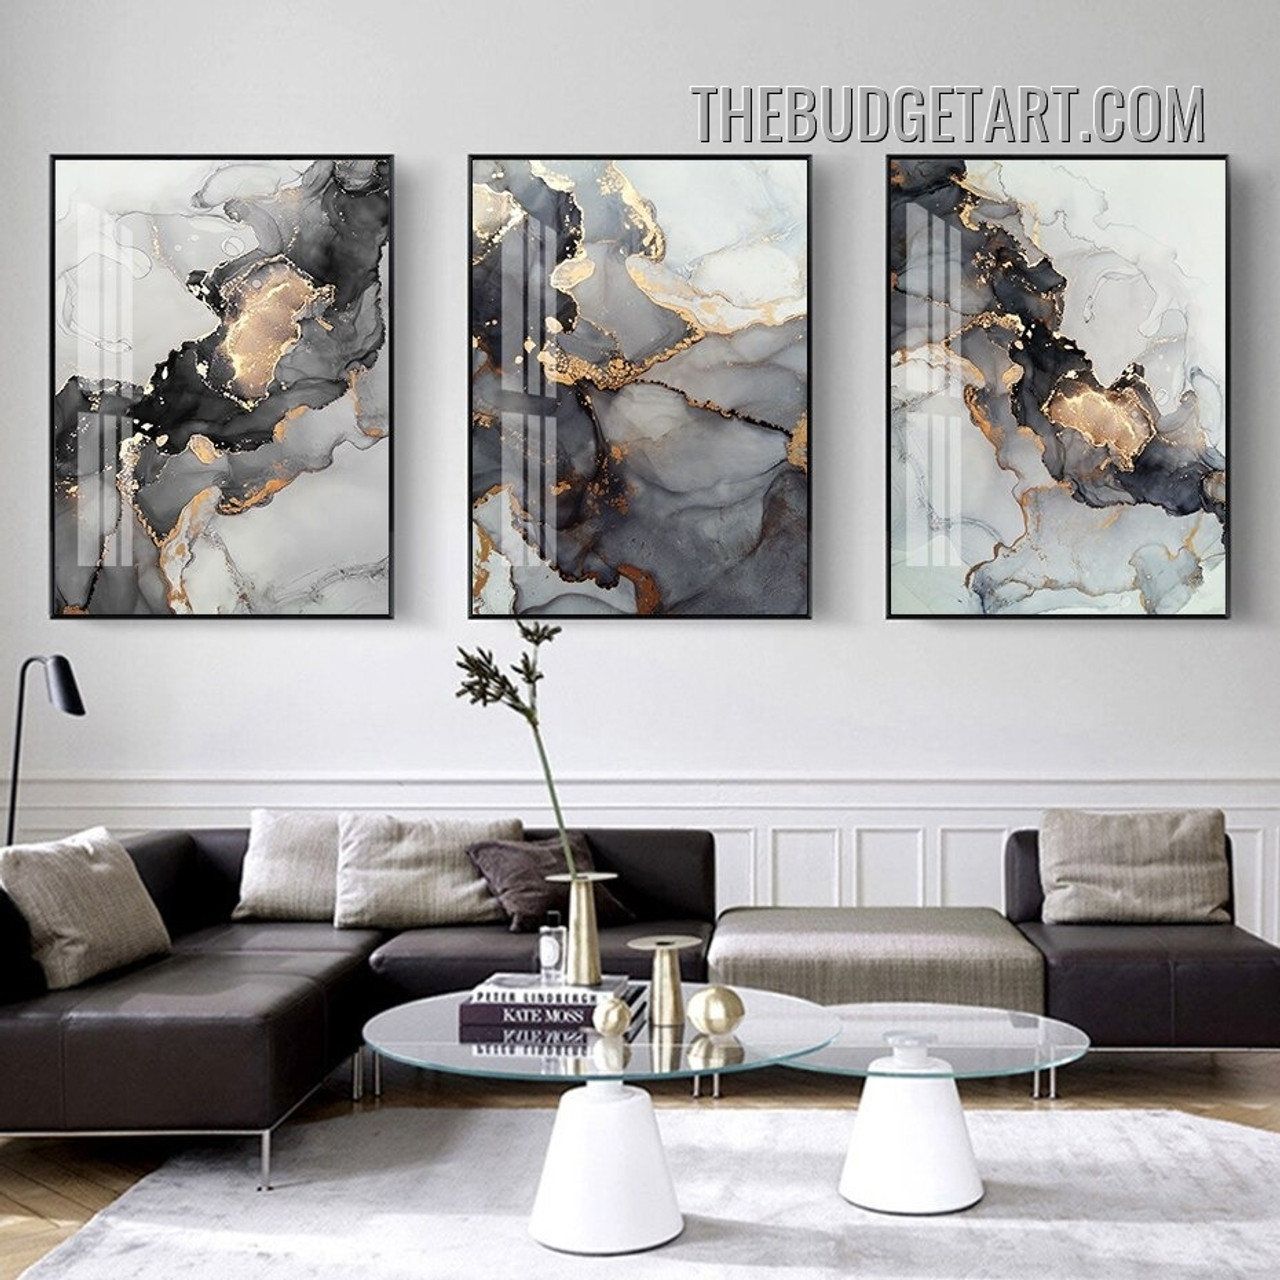 3 Pieces Abstract Canvas Wall Art Black White Marble Mosaic With Golden  Veins Posters And Prints Living Room Home Decor-No Framed